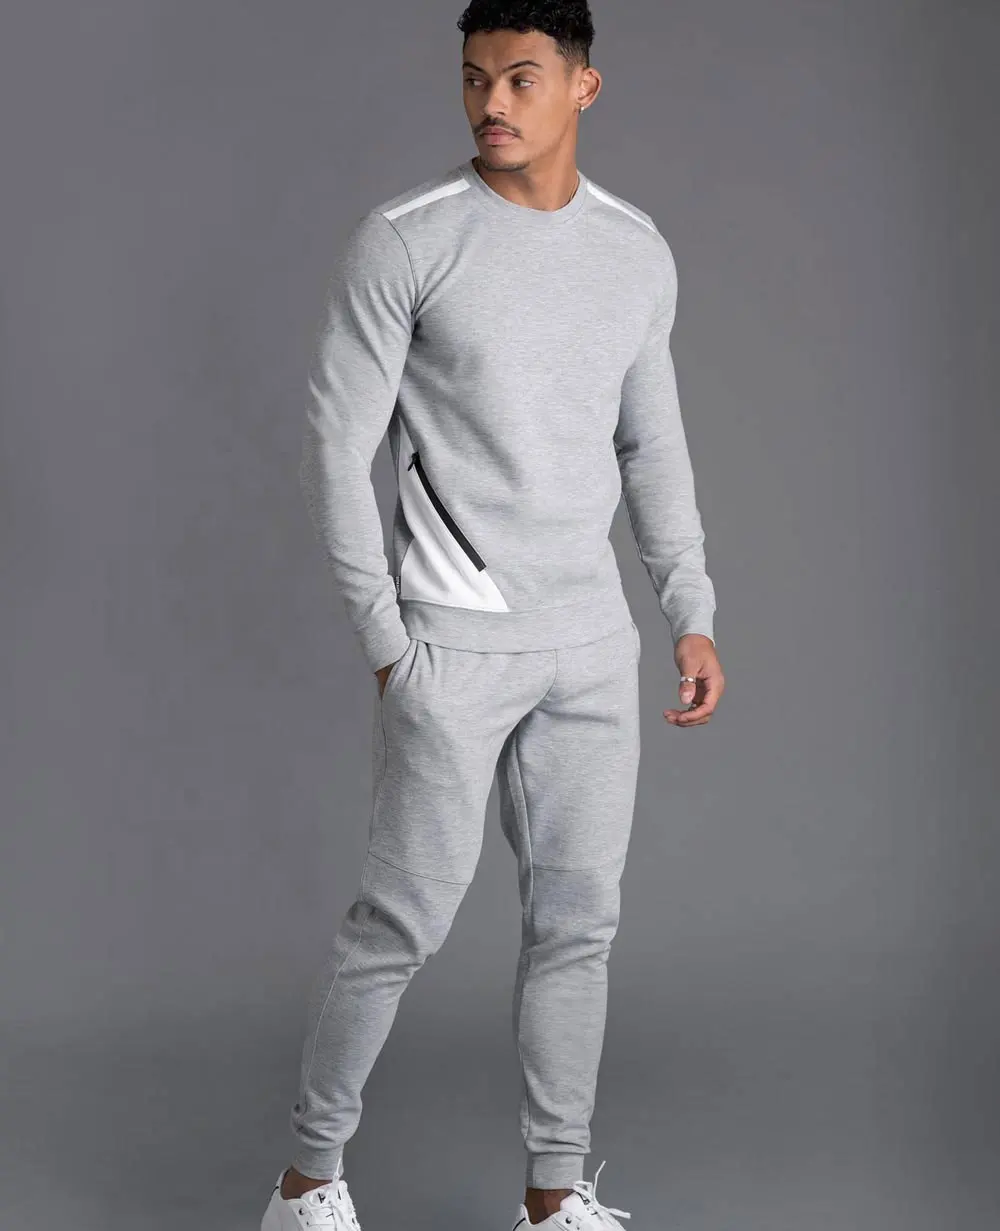 Wholesale Blank Jogging Suits Mens Sweat Suit/Custom Made Tracksuits Sweatsuit Set With Grey